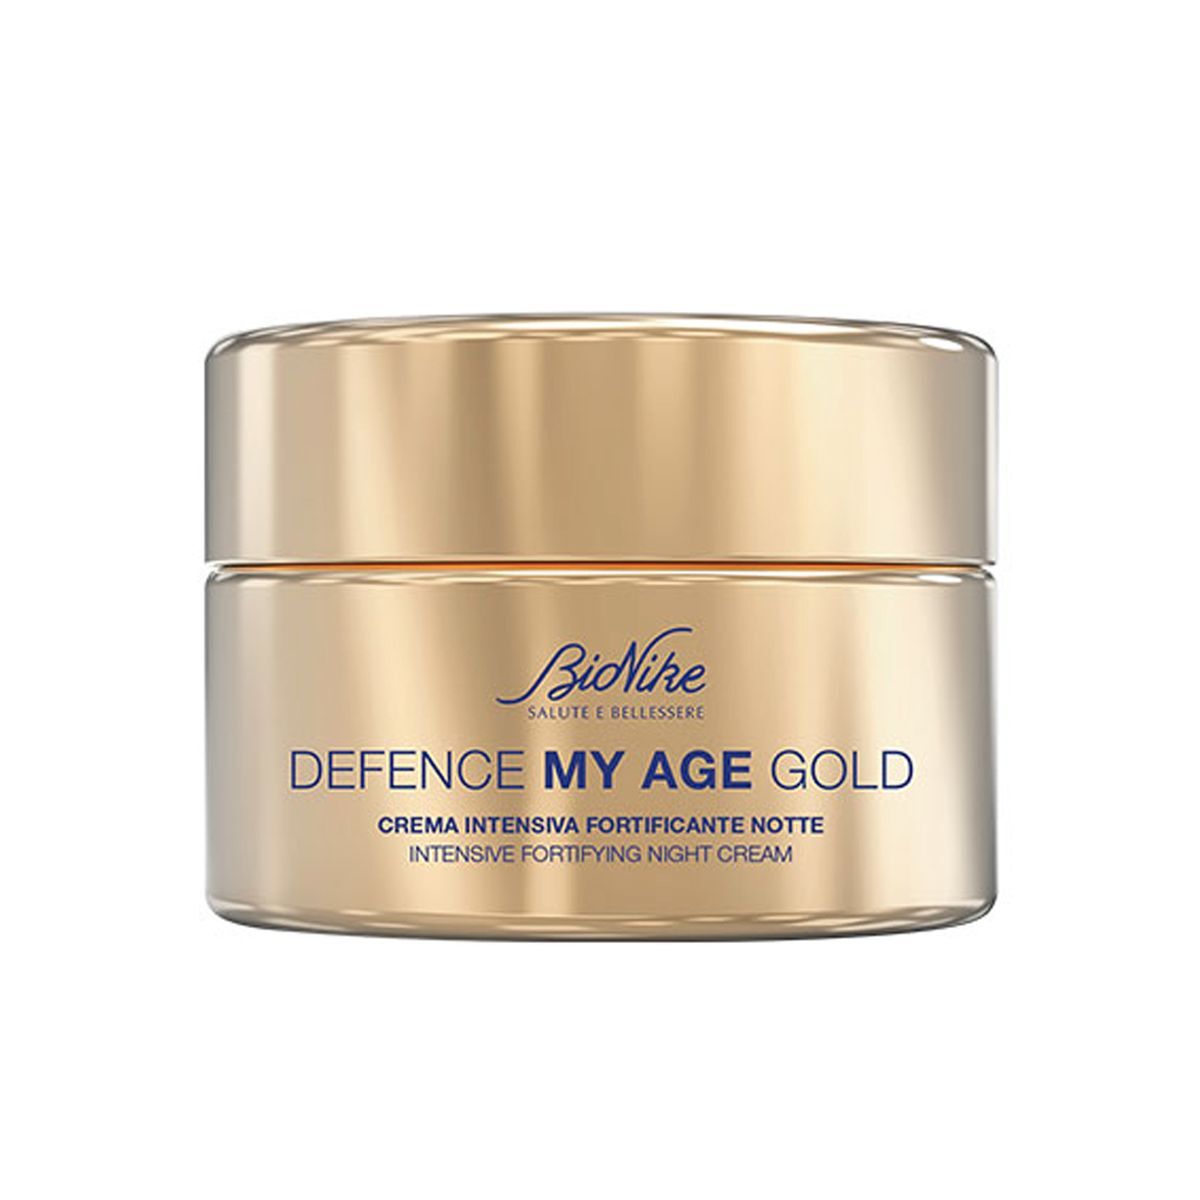 Bionike Defence My Age Gold Crema Ricca Intensificante Notte 50ml